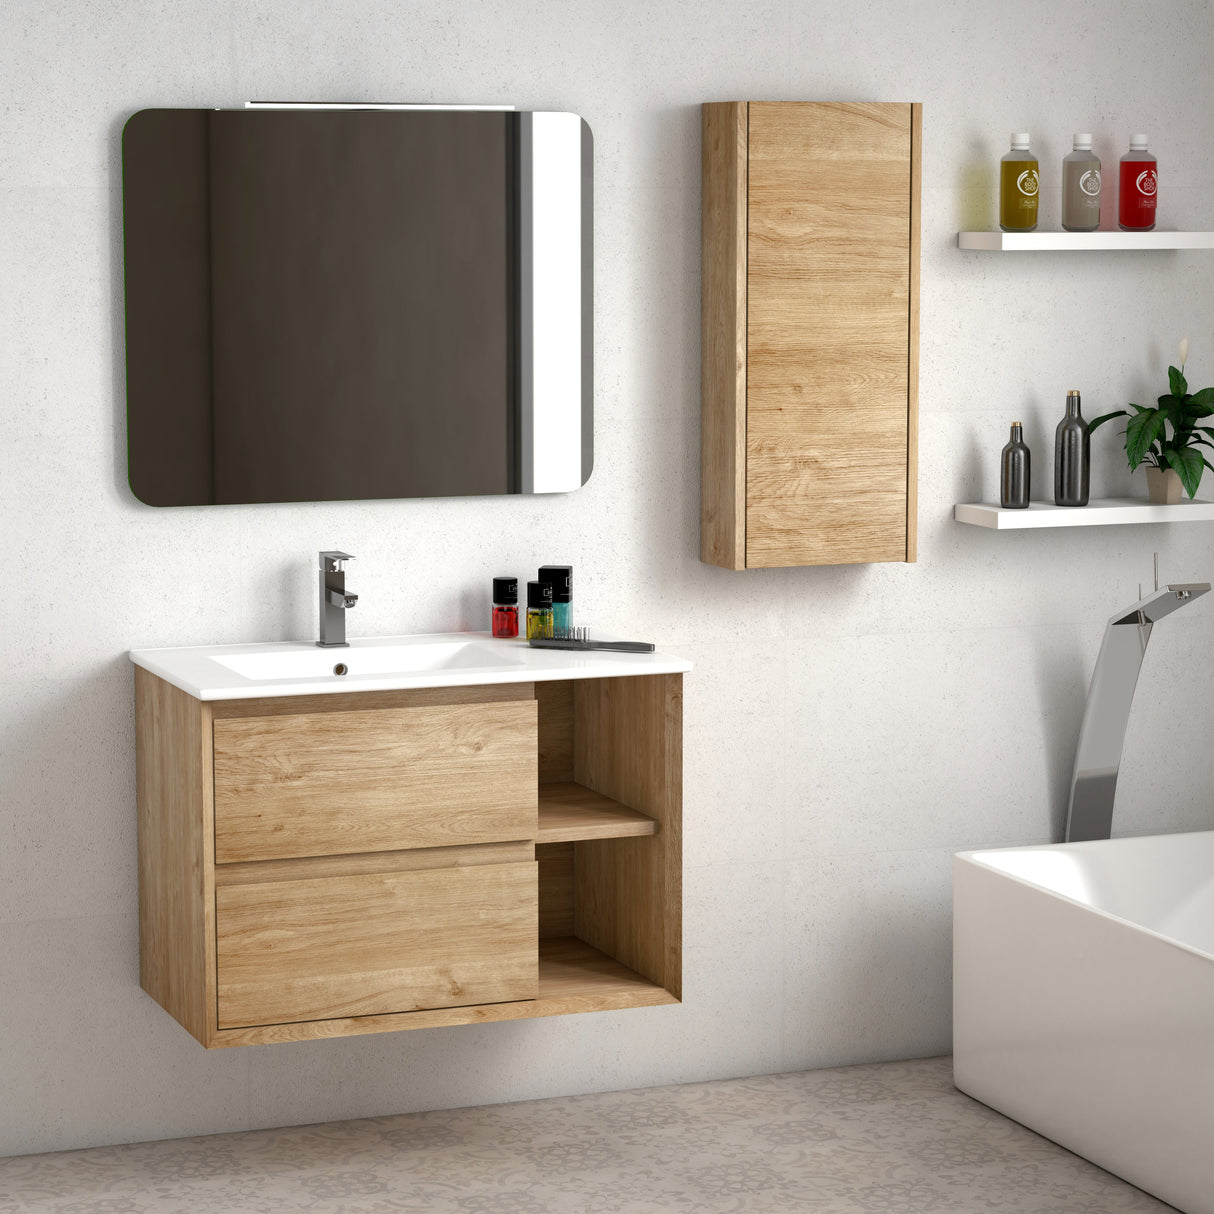 DAX Oceanside Engineered Wood and Porcelain Left Onix Basin with Single Vanity, 32", Oak DAX-OCE013214-ONX